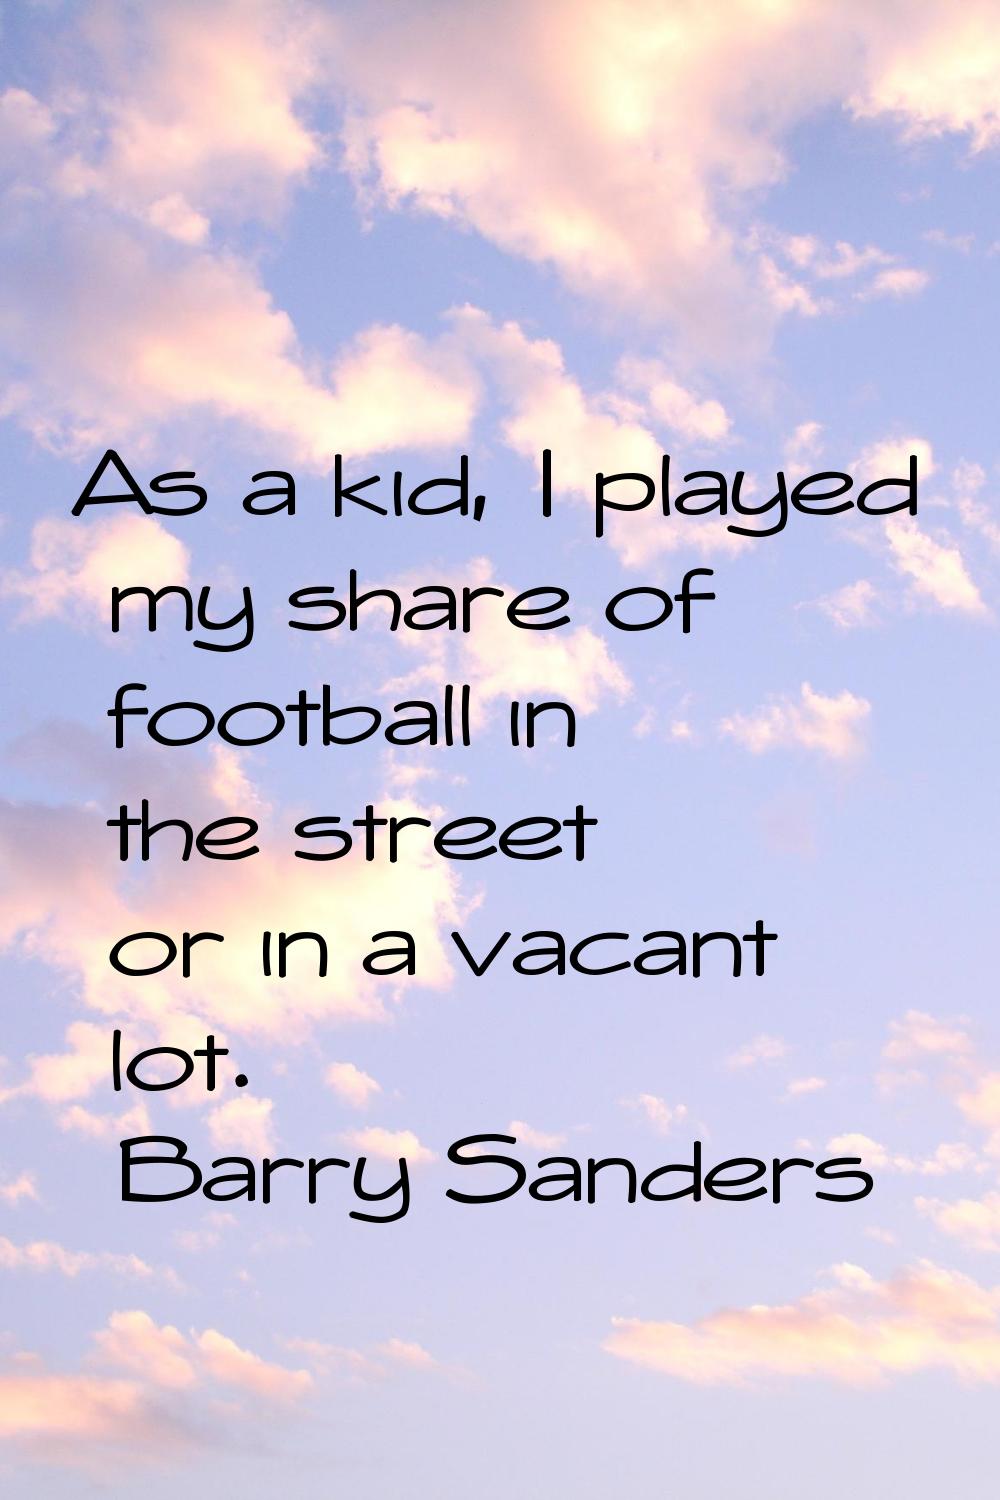 As a kid, I played my share of football in the street or in a vacant lot.